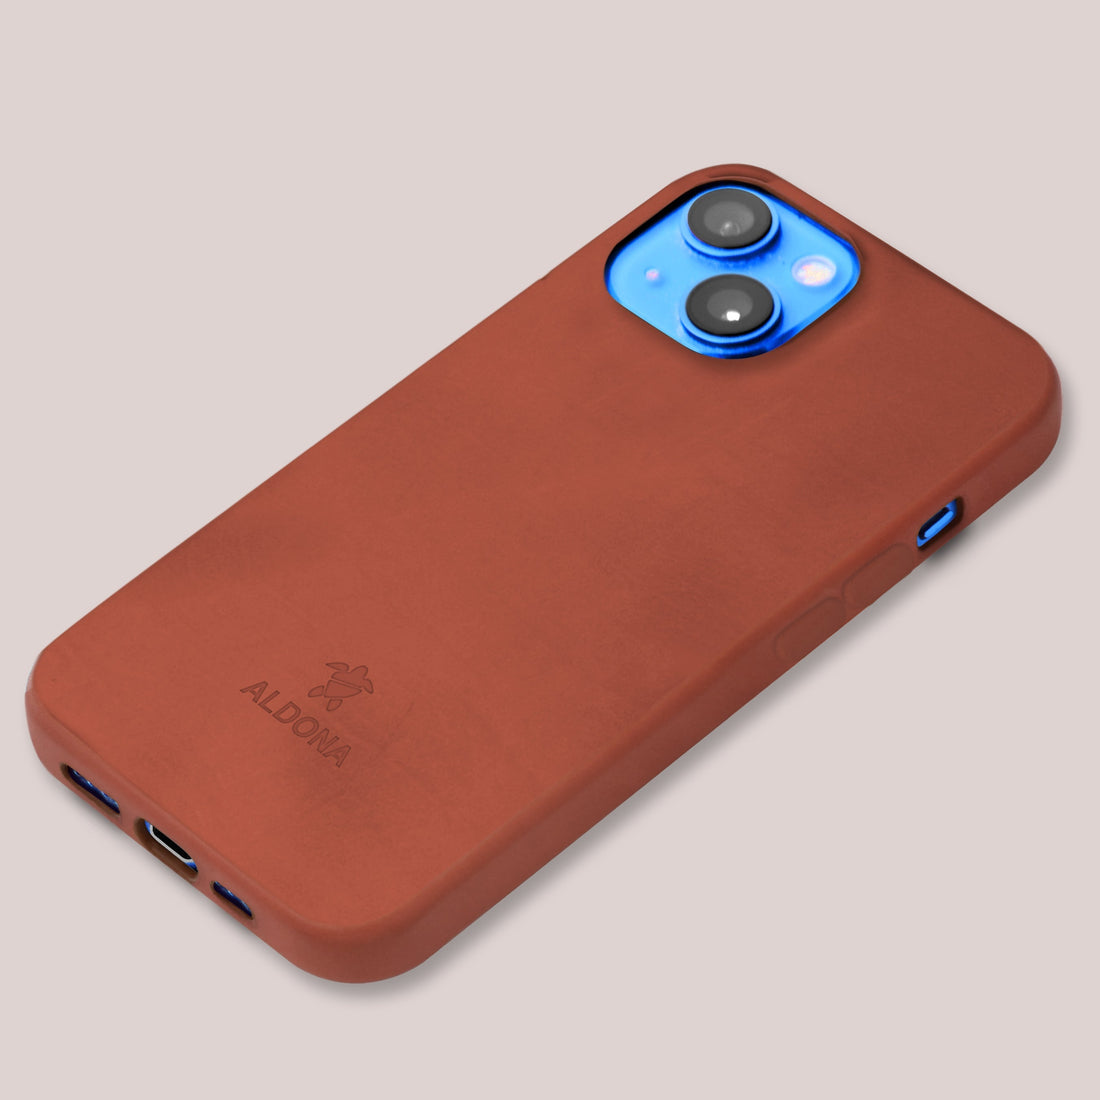 Kalon Case for iPhone 13 with MagSafe Compatibility - Cognac